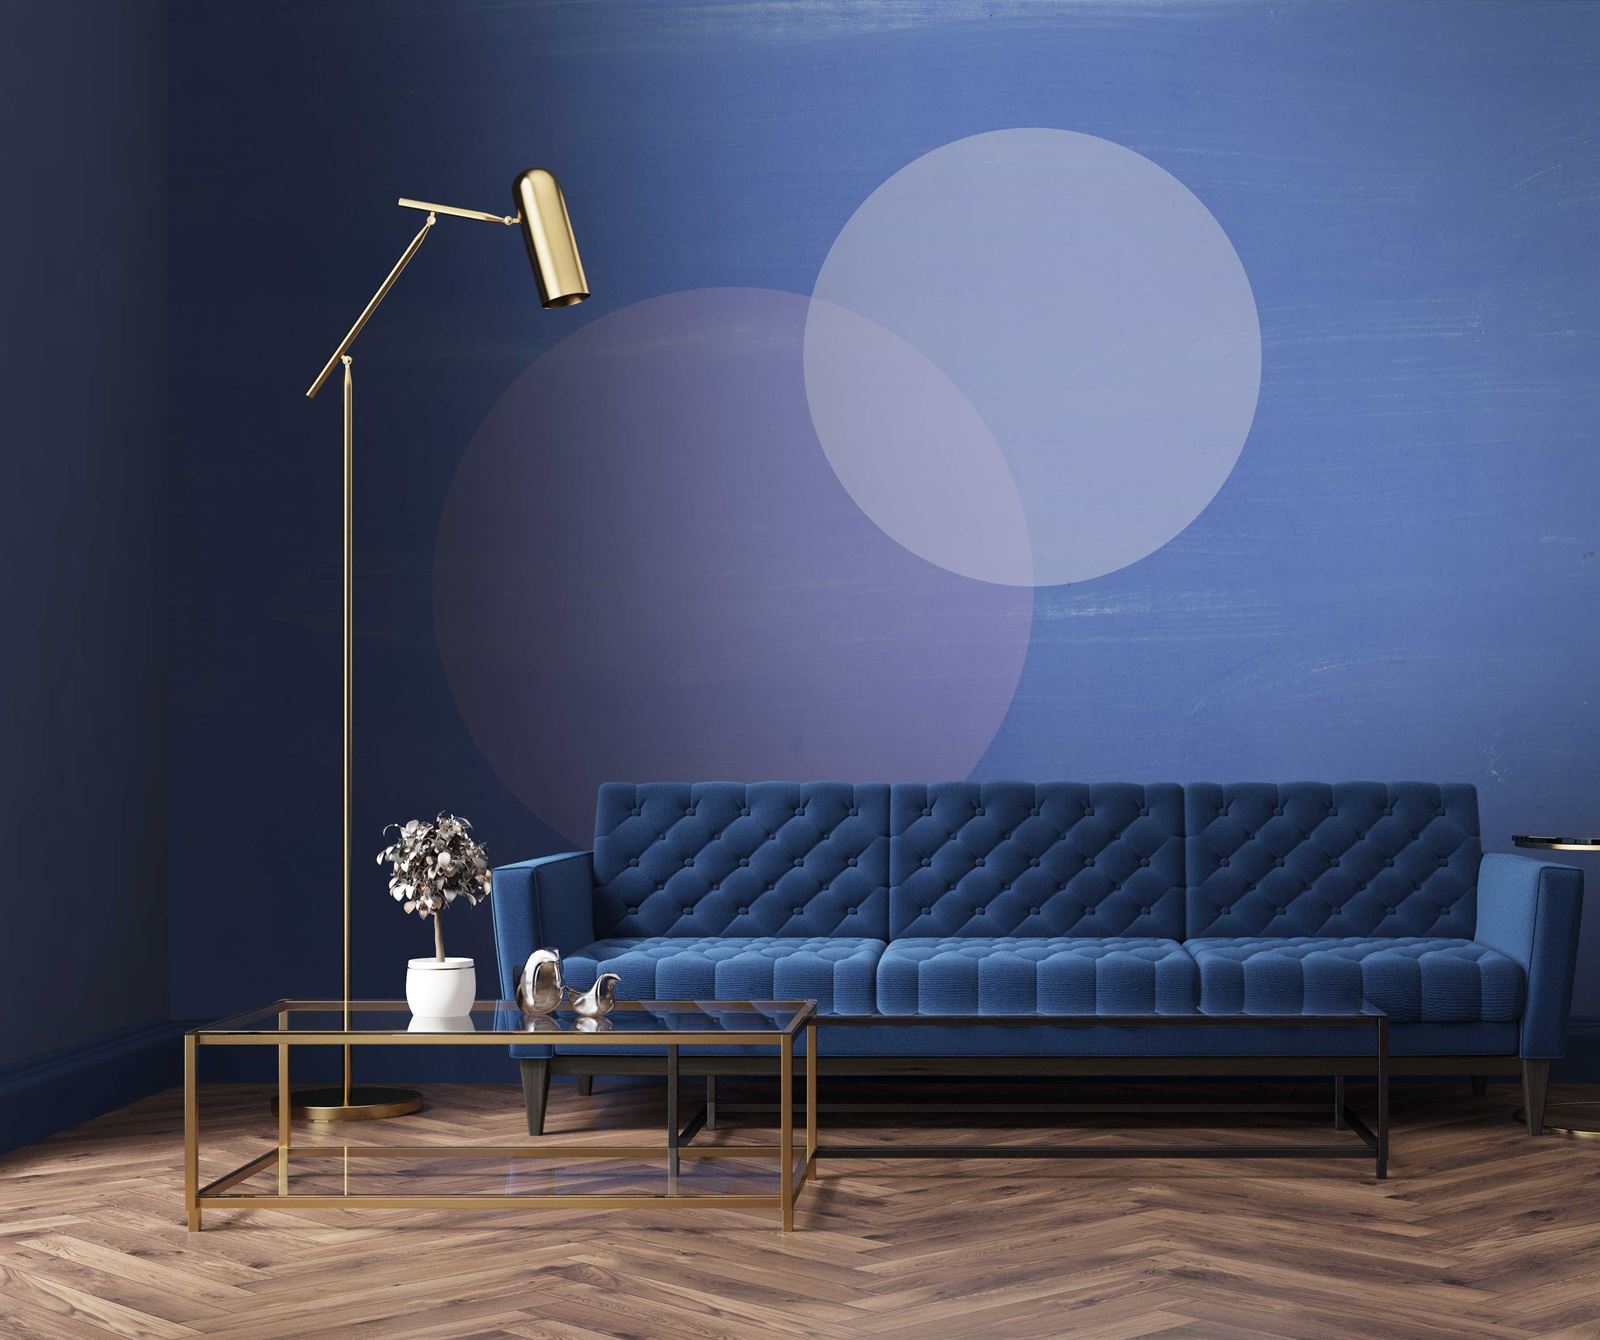 Circles by 2LG is a modern bold wall covering, available in blue, green and pink